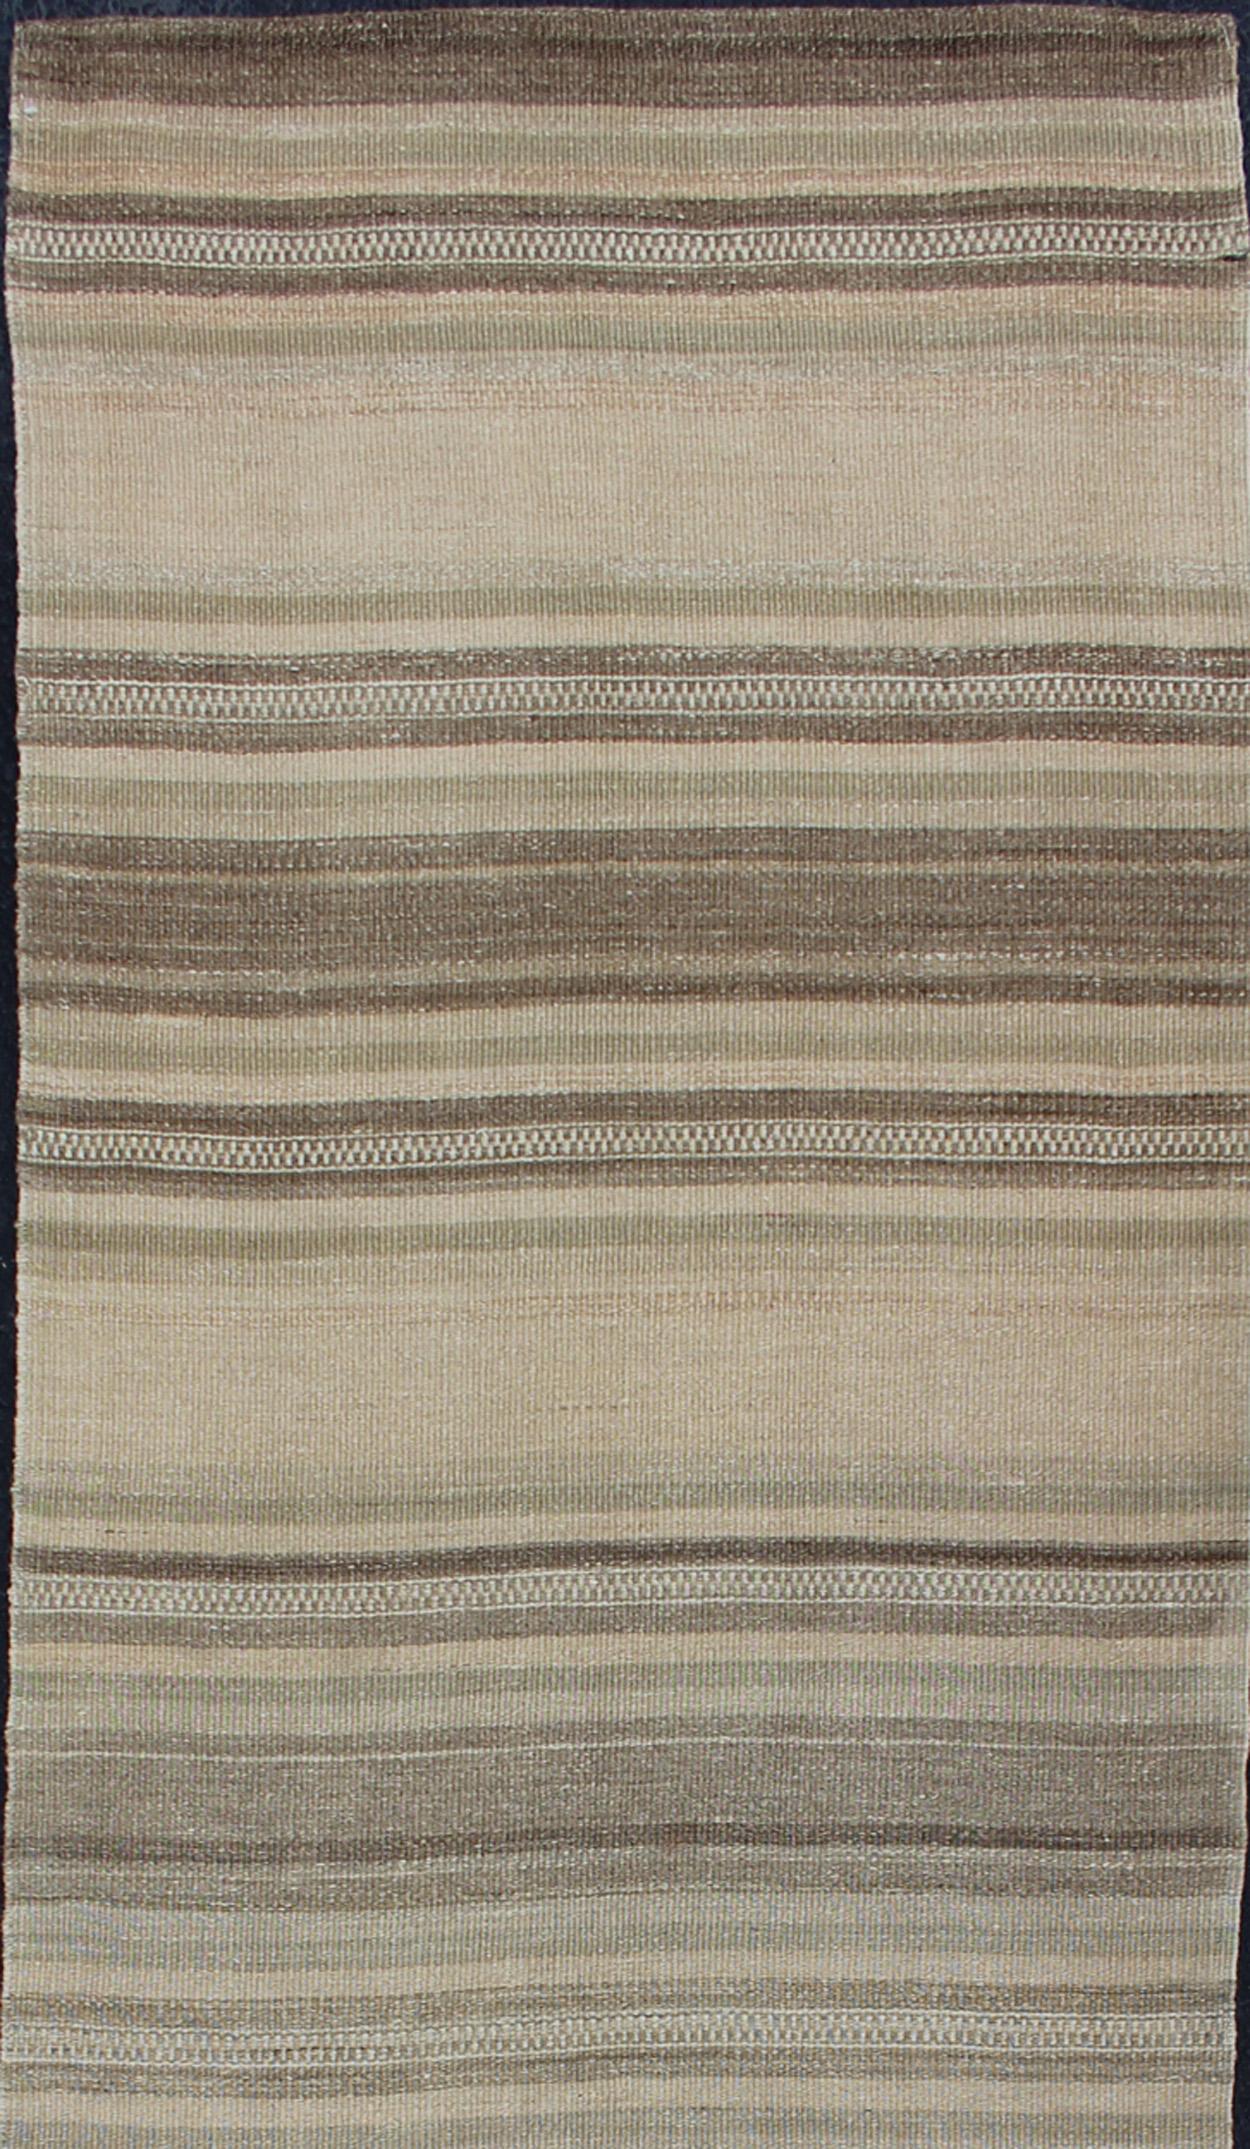 Vintage Kilim runner from Turkey with stripes, Keivan Woven Arts / rug EN-179070, country of origin / type: Turkey / Kilim, circa 1960

This softly striped-design vintage runner from Turkey features a modern look, rendered in taupe, gray, olive